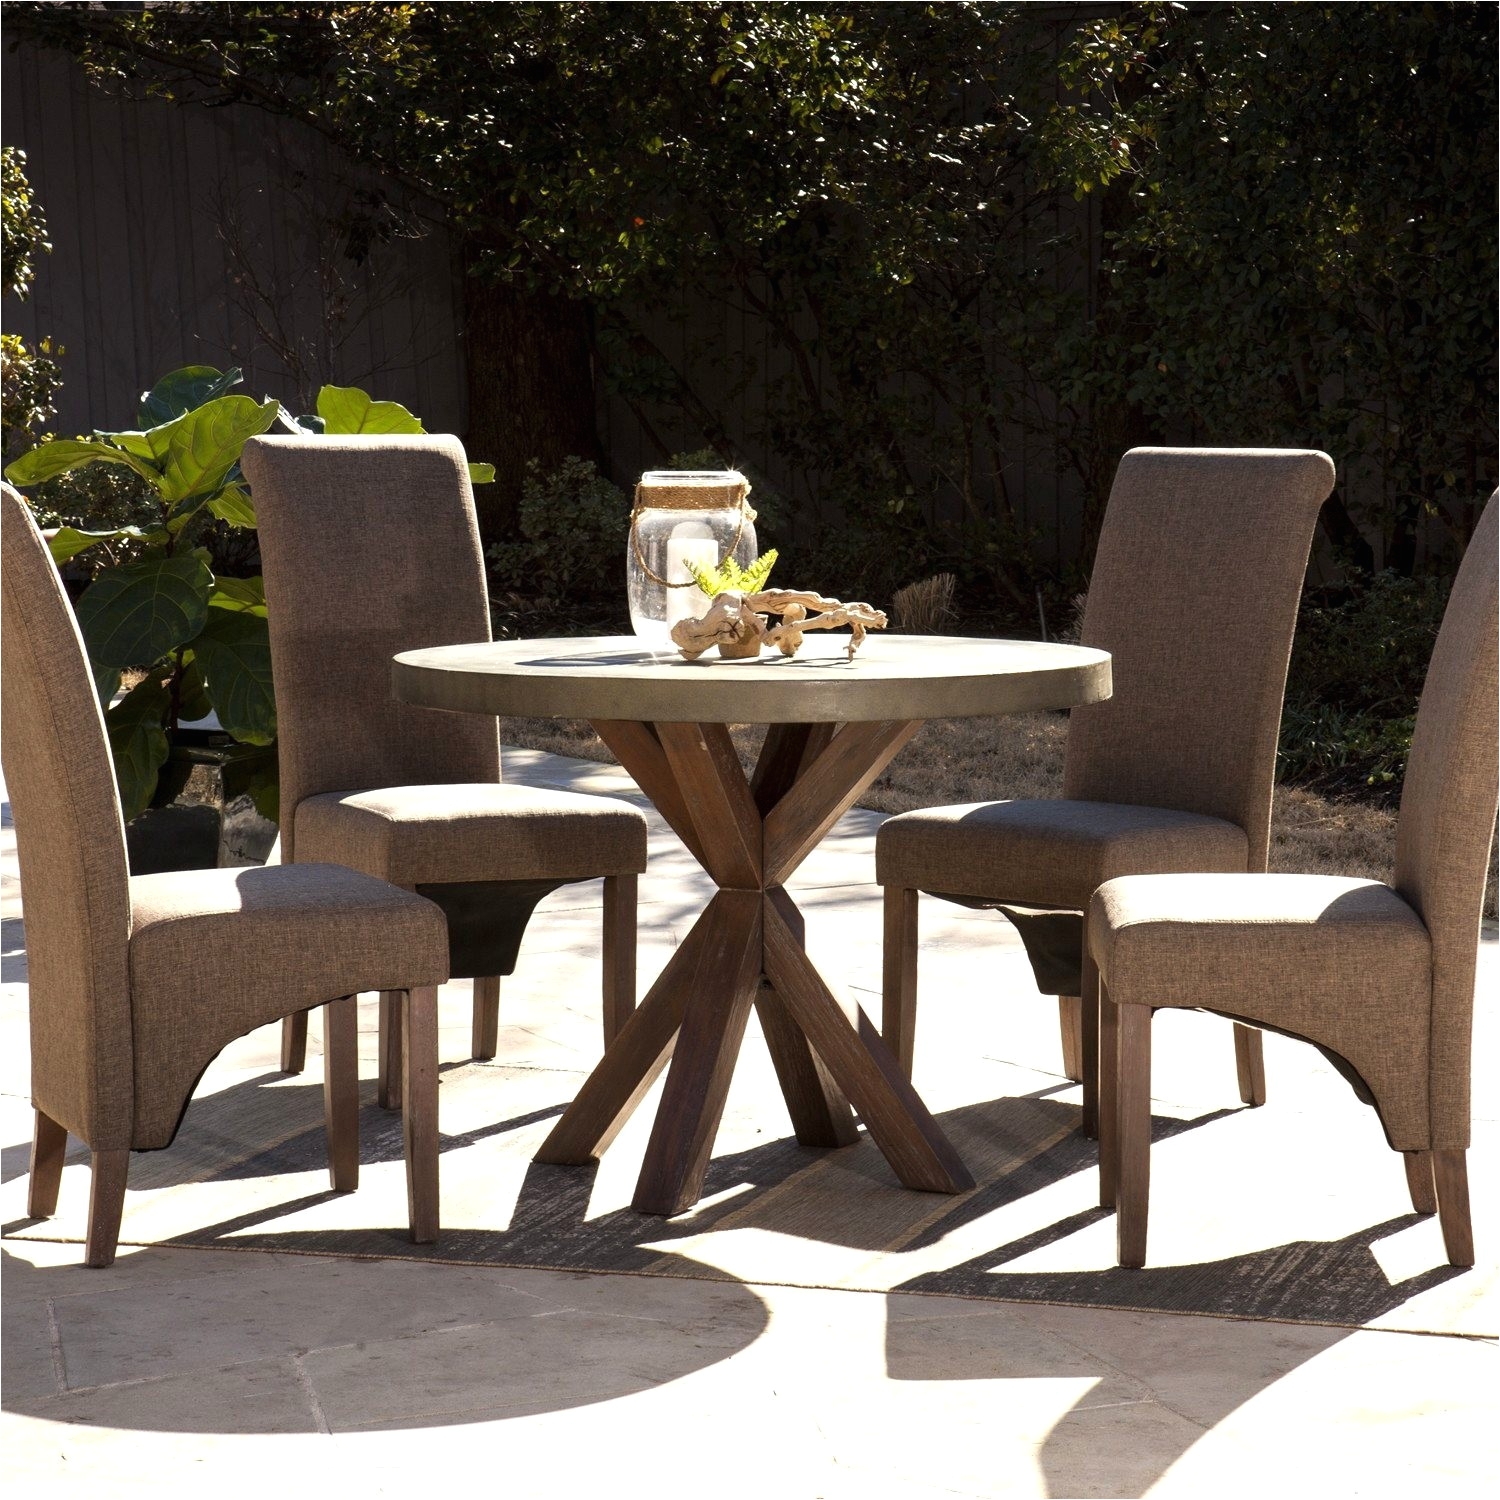 Outdoor Table and Chairs at Walmart Home Design Walmart Outdoor Patio Furniture Inspirational Wicker